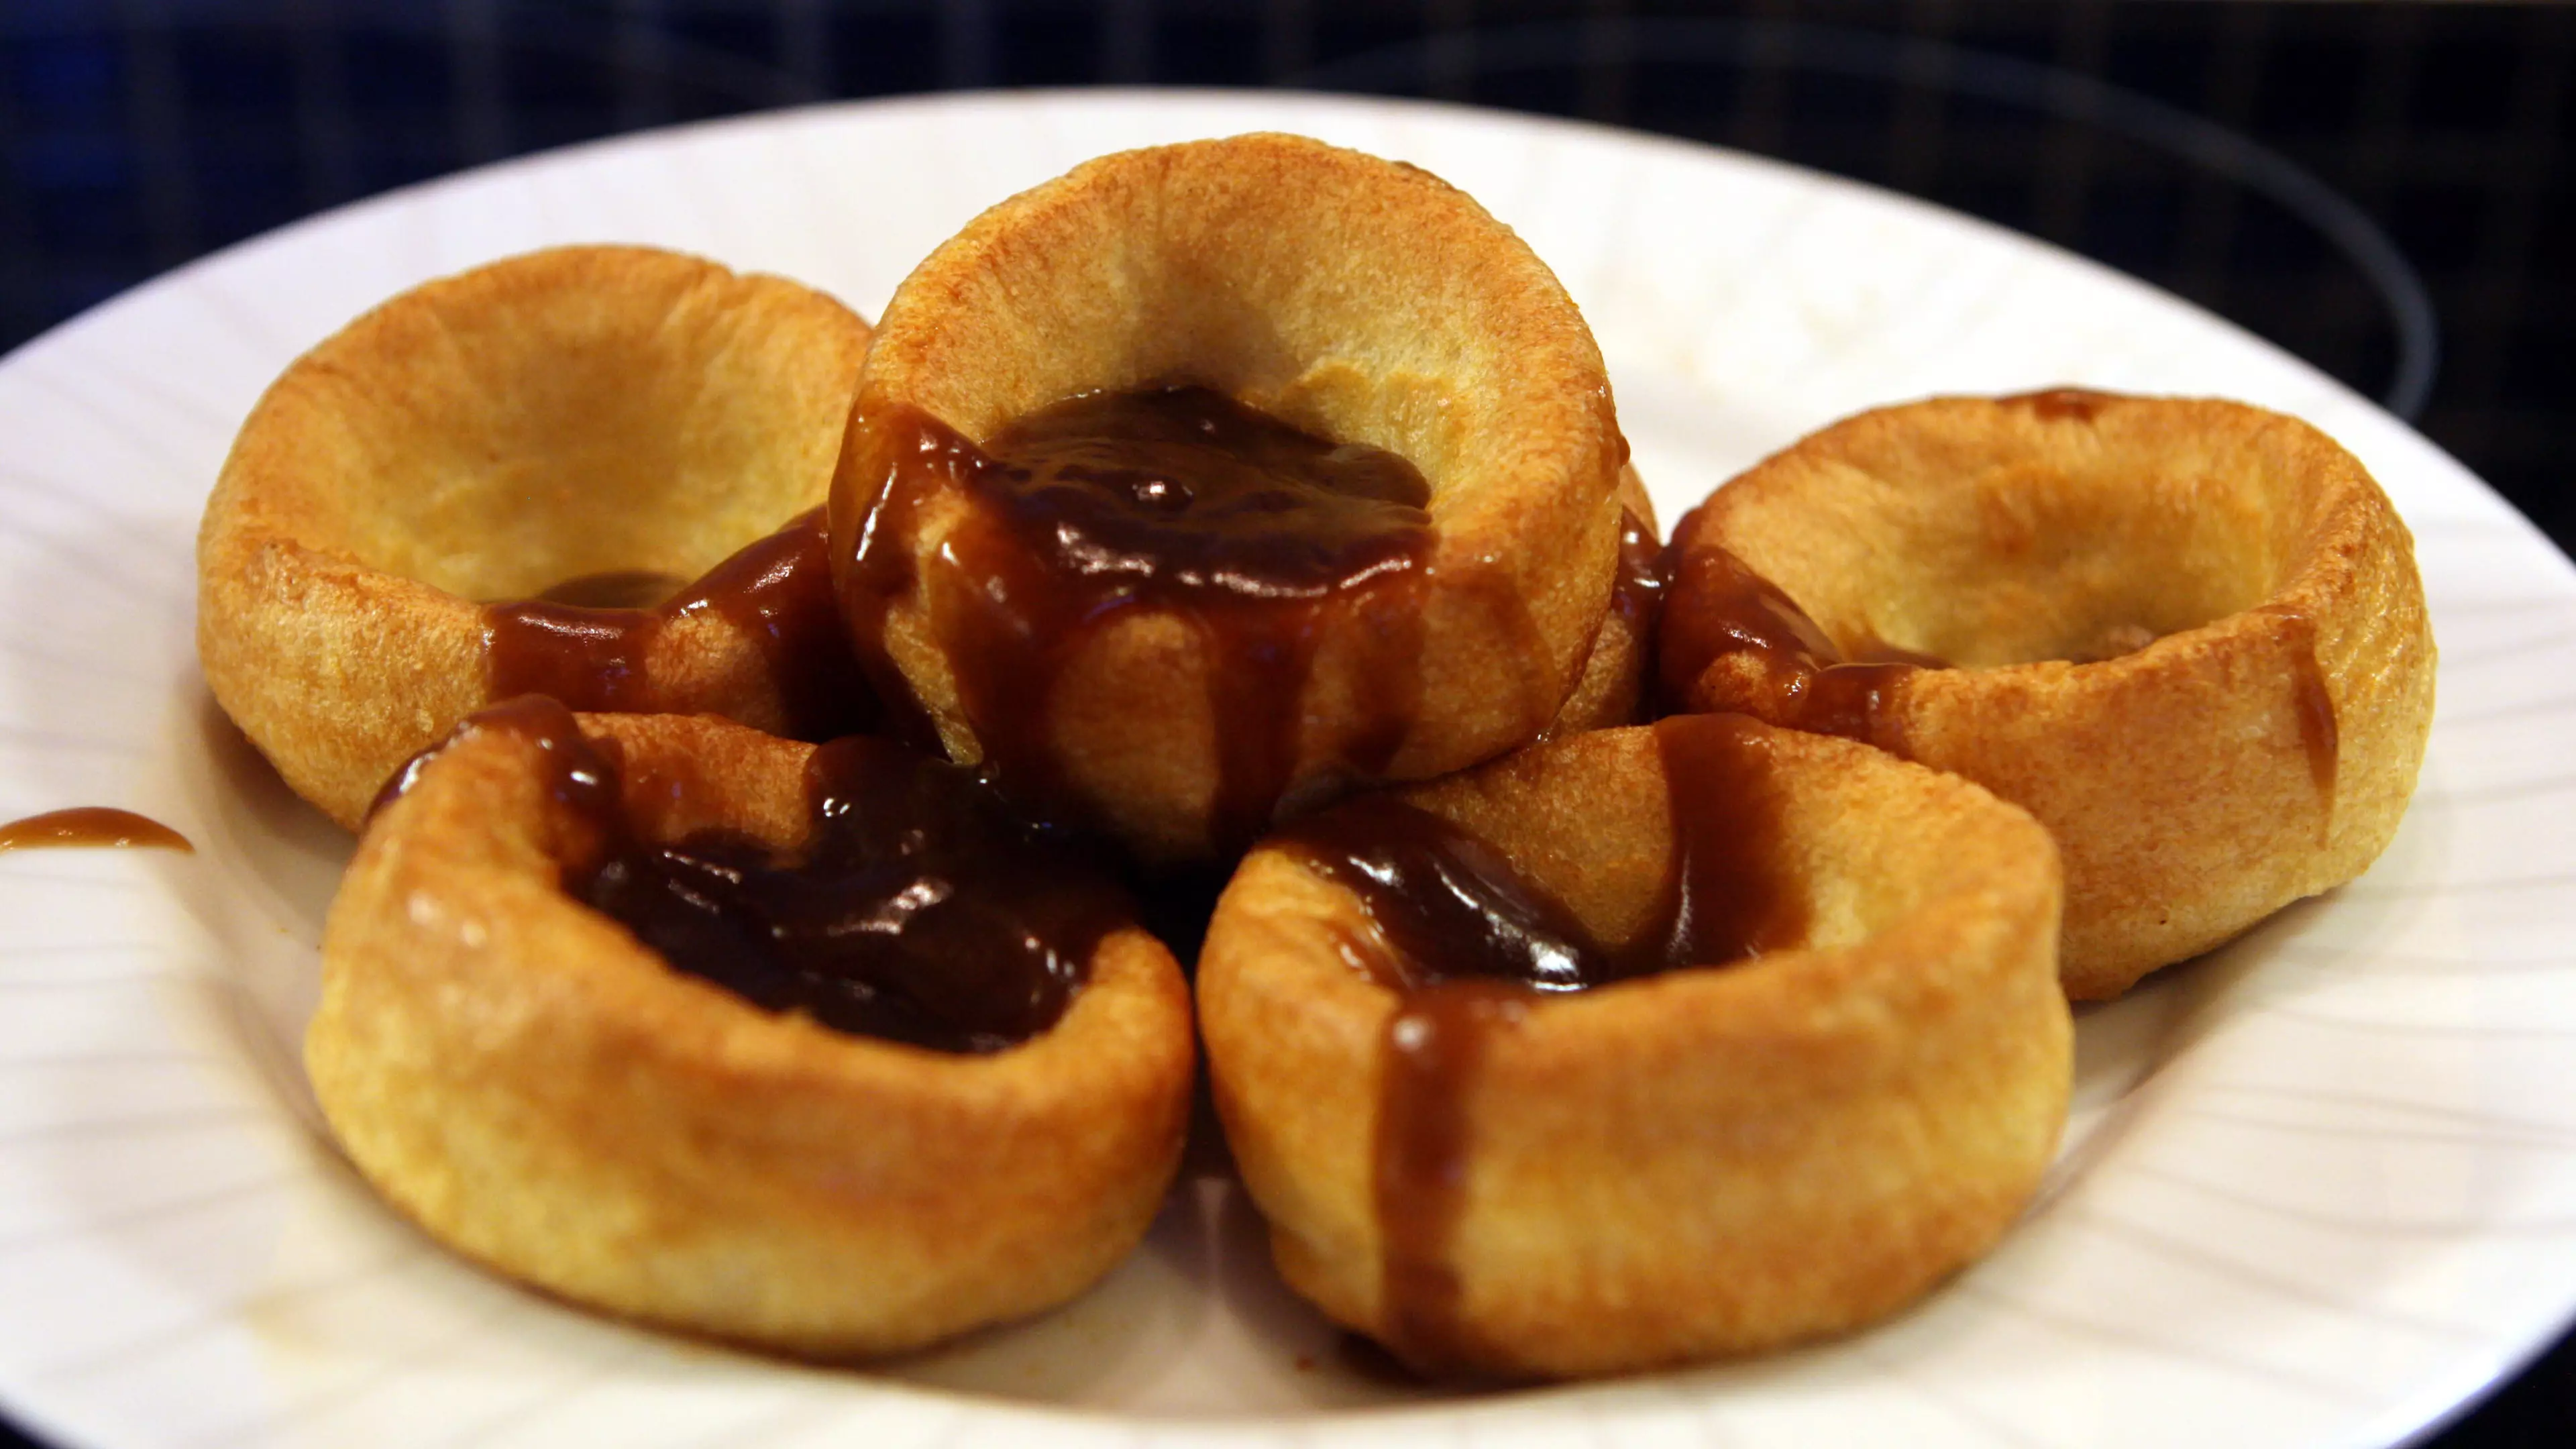 A Yorkshire Pudding Festival Is Coming To The UK Next Year